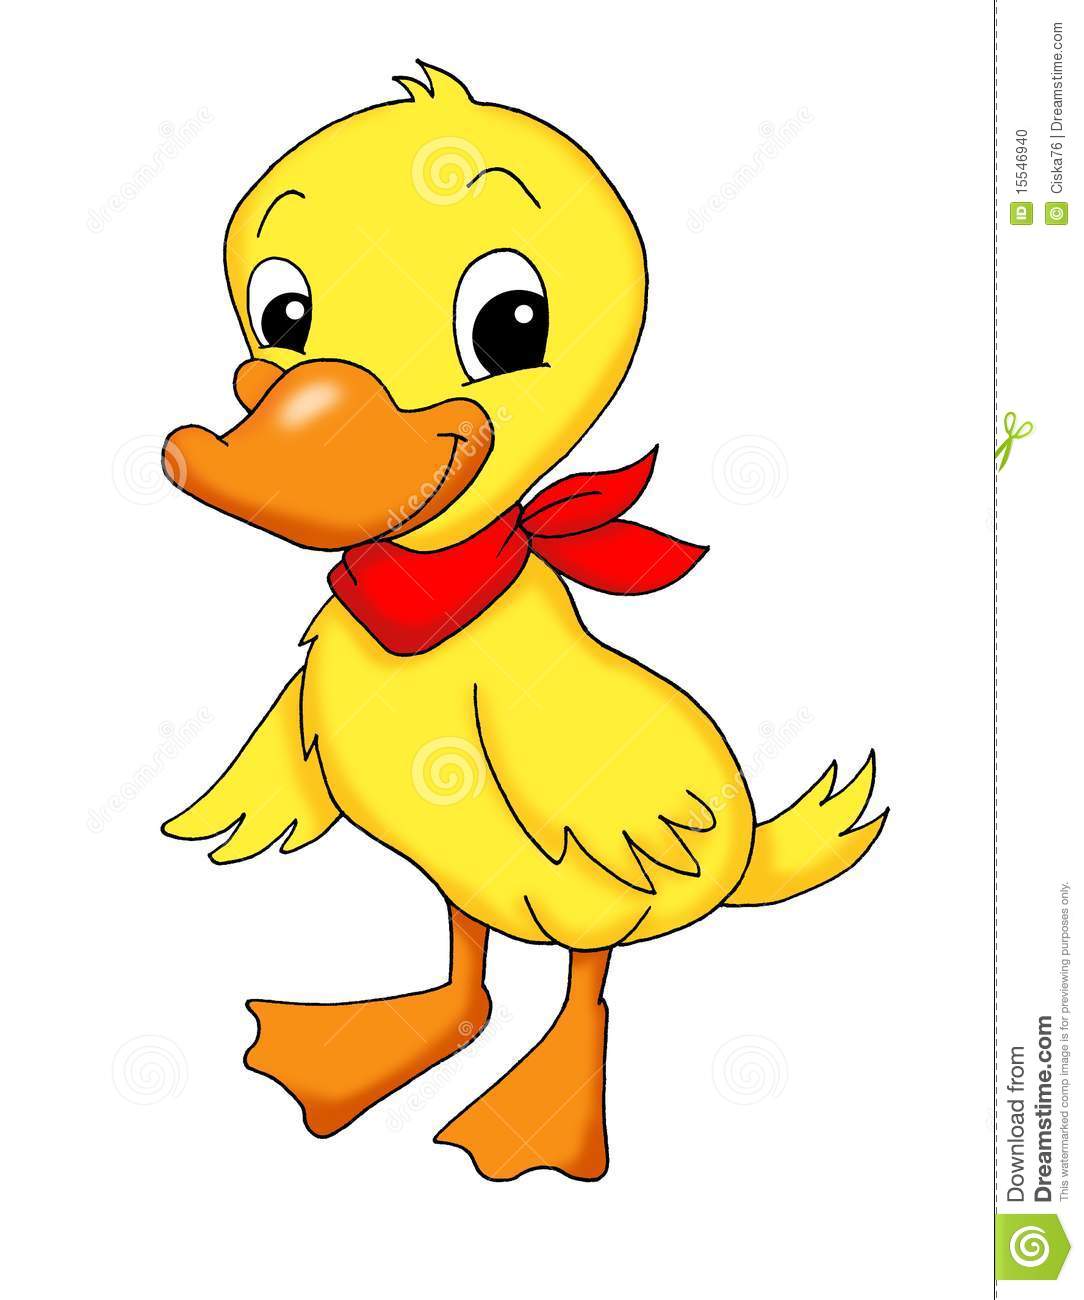 Duckling clipart #18, Download drawings